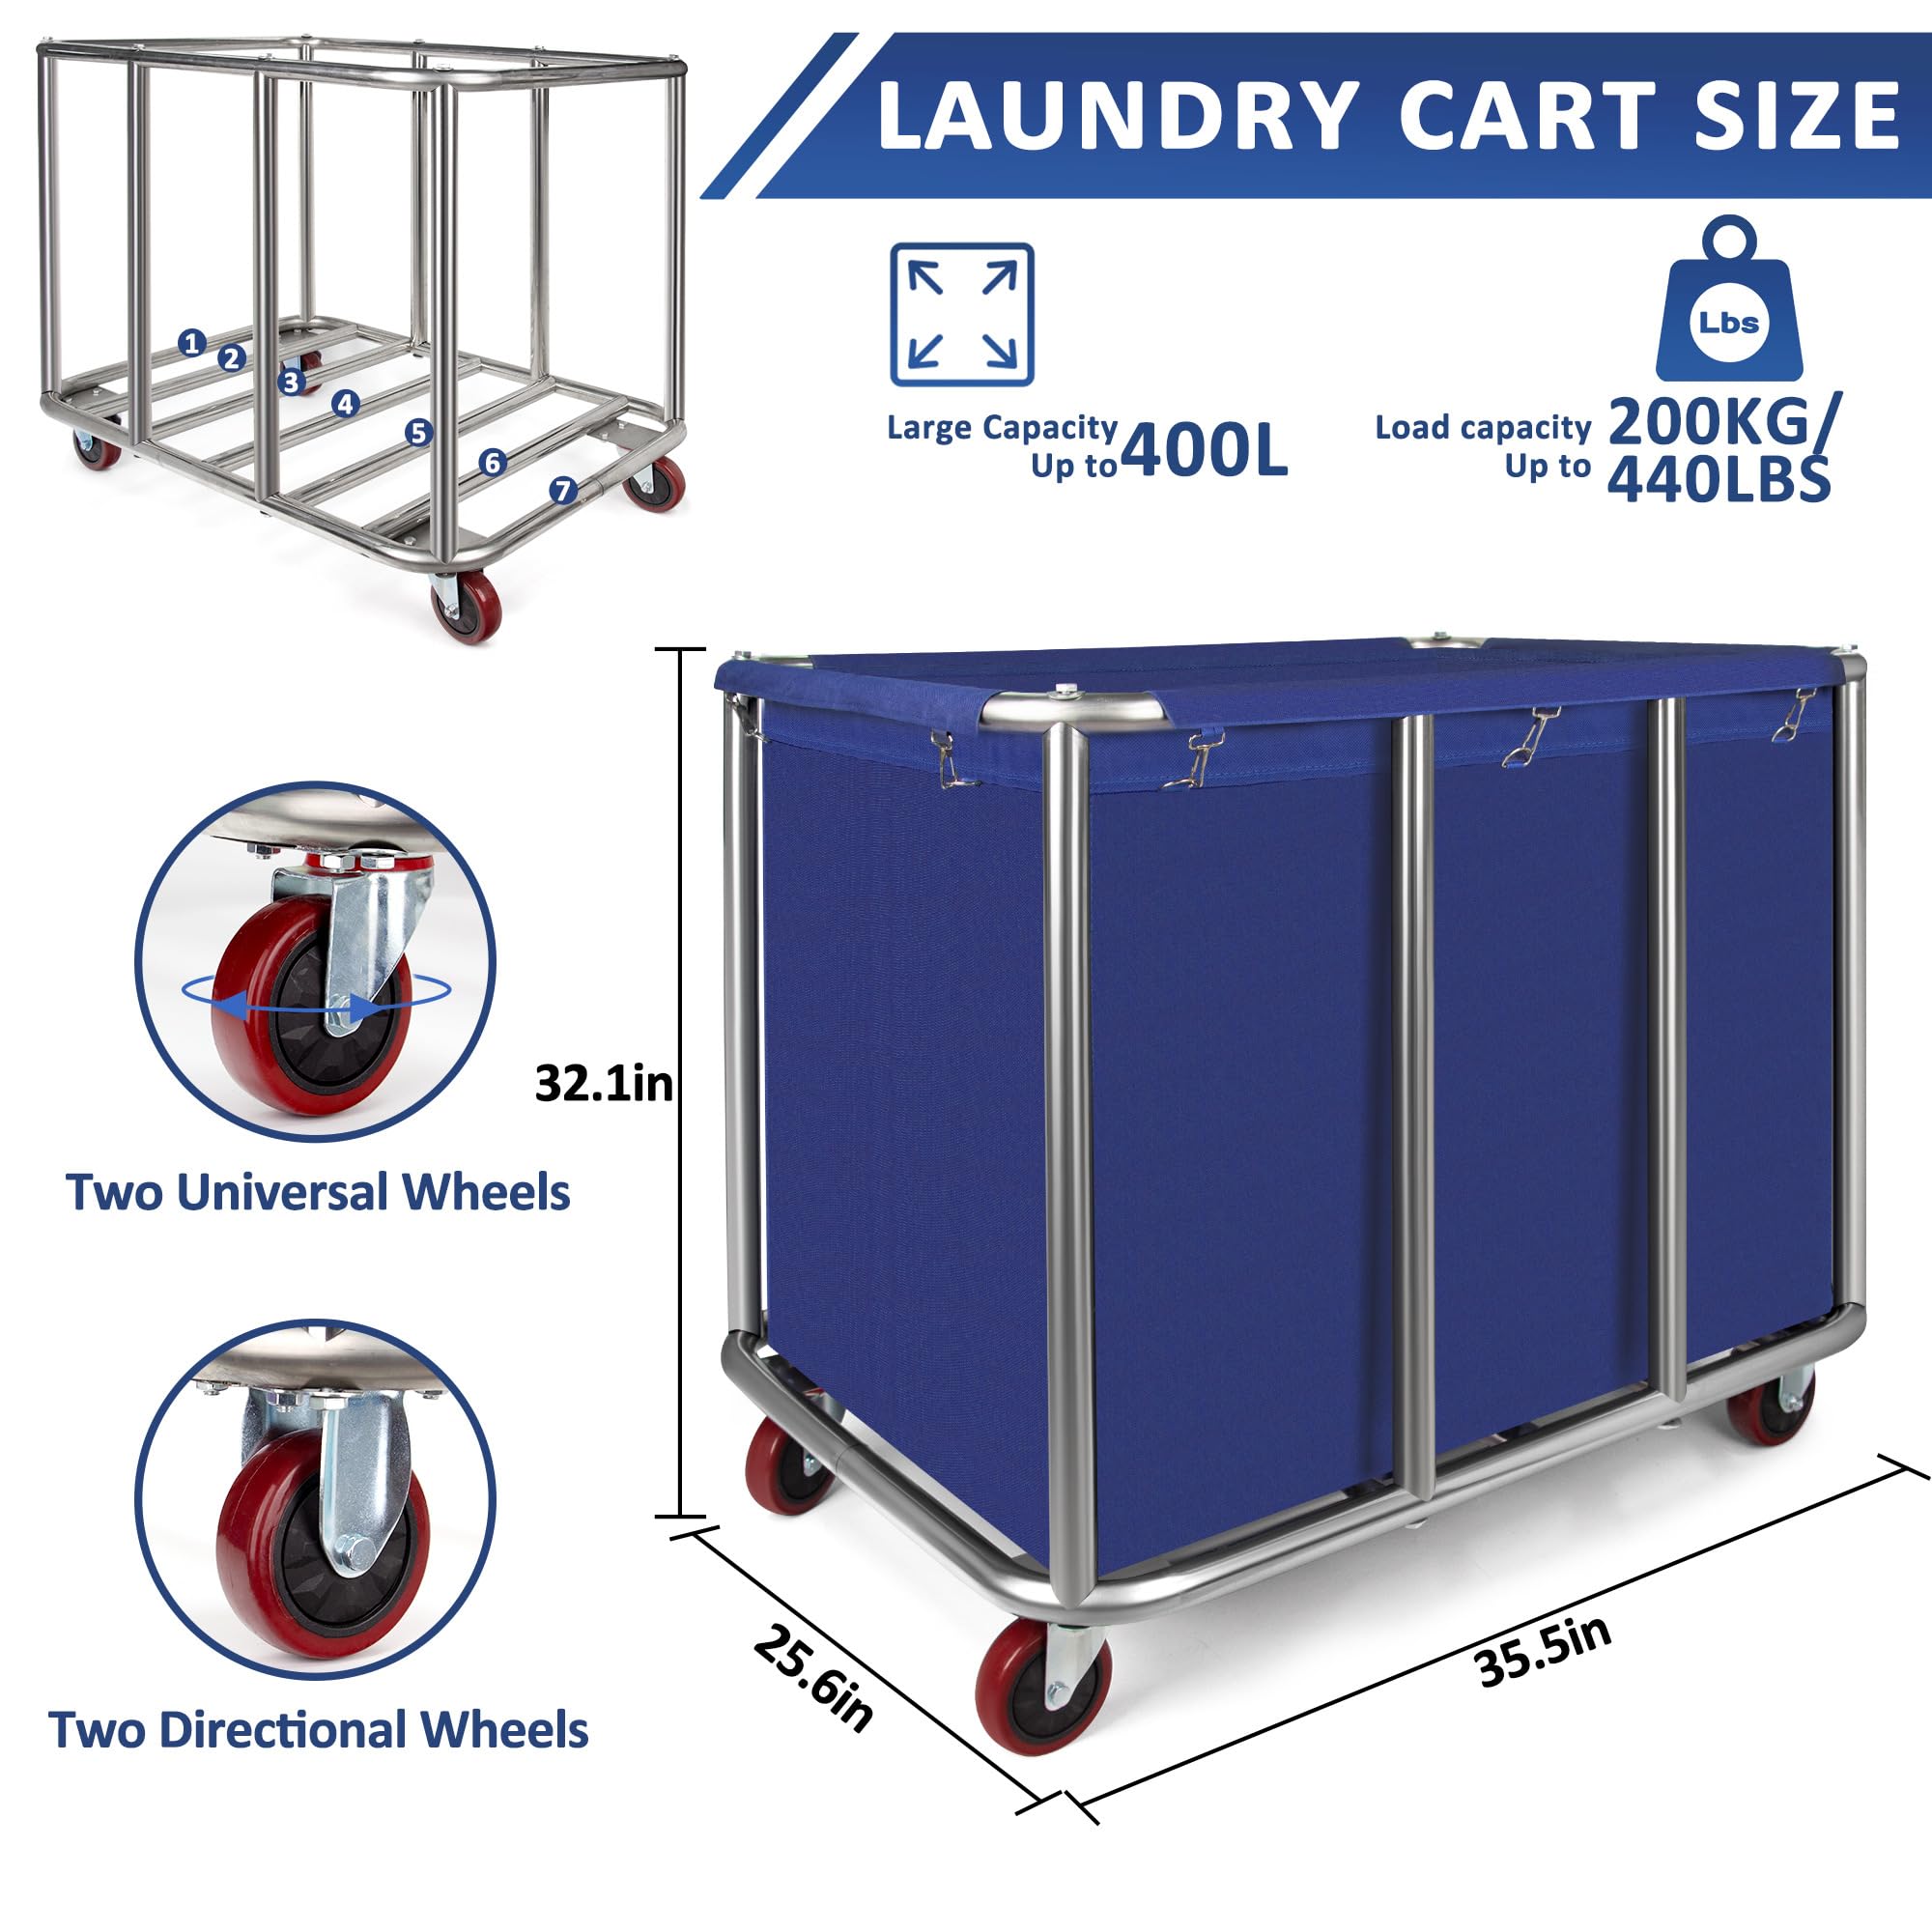 Commercial Laundry Cart with Wheels,11.35 Bushel Large Laundry Cart,Industrial Laundry Cart with Stainless Steel Frame and Waterproof Oxford Cloth,Industrial Laundry Hamper Load 440Lbs